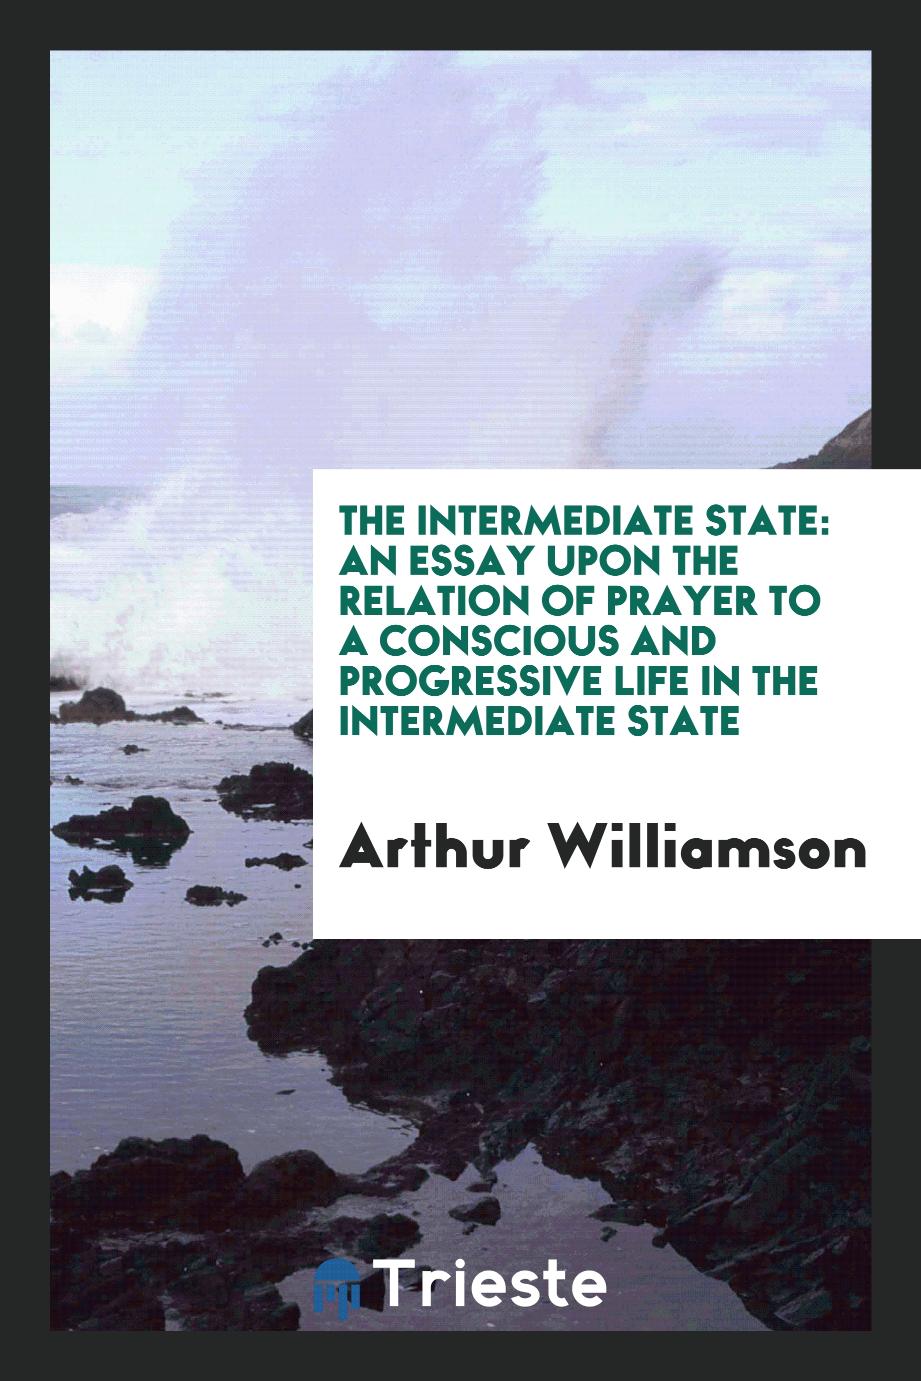 The intermediate state: an essay upon the relation of prayer to a conscious and progressive life in the intermediate state